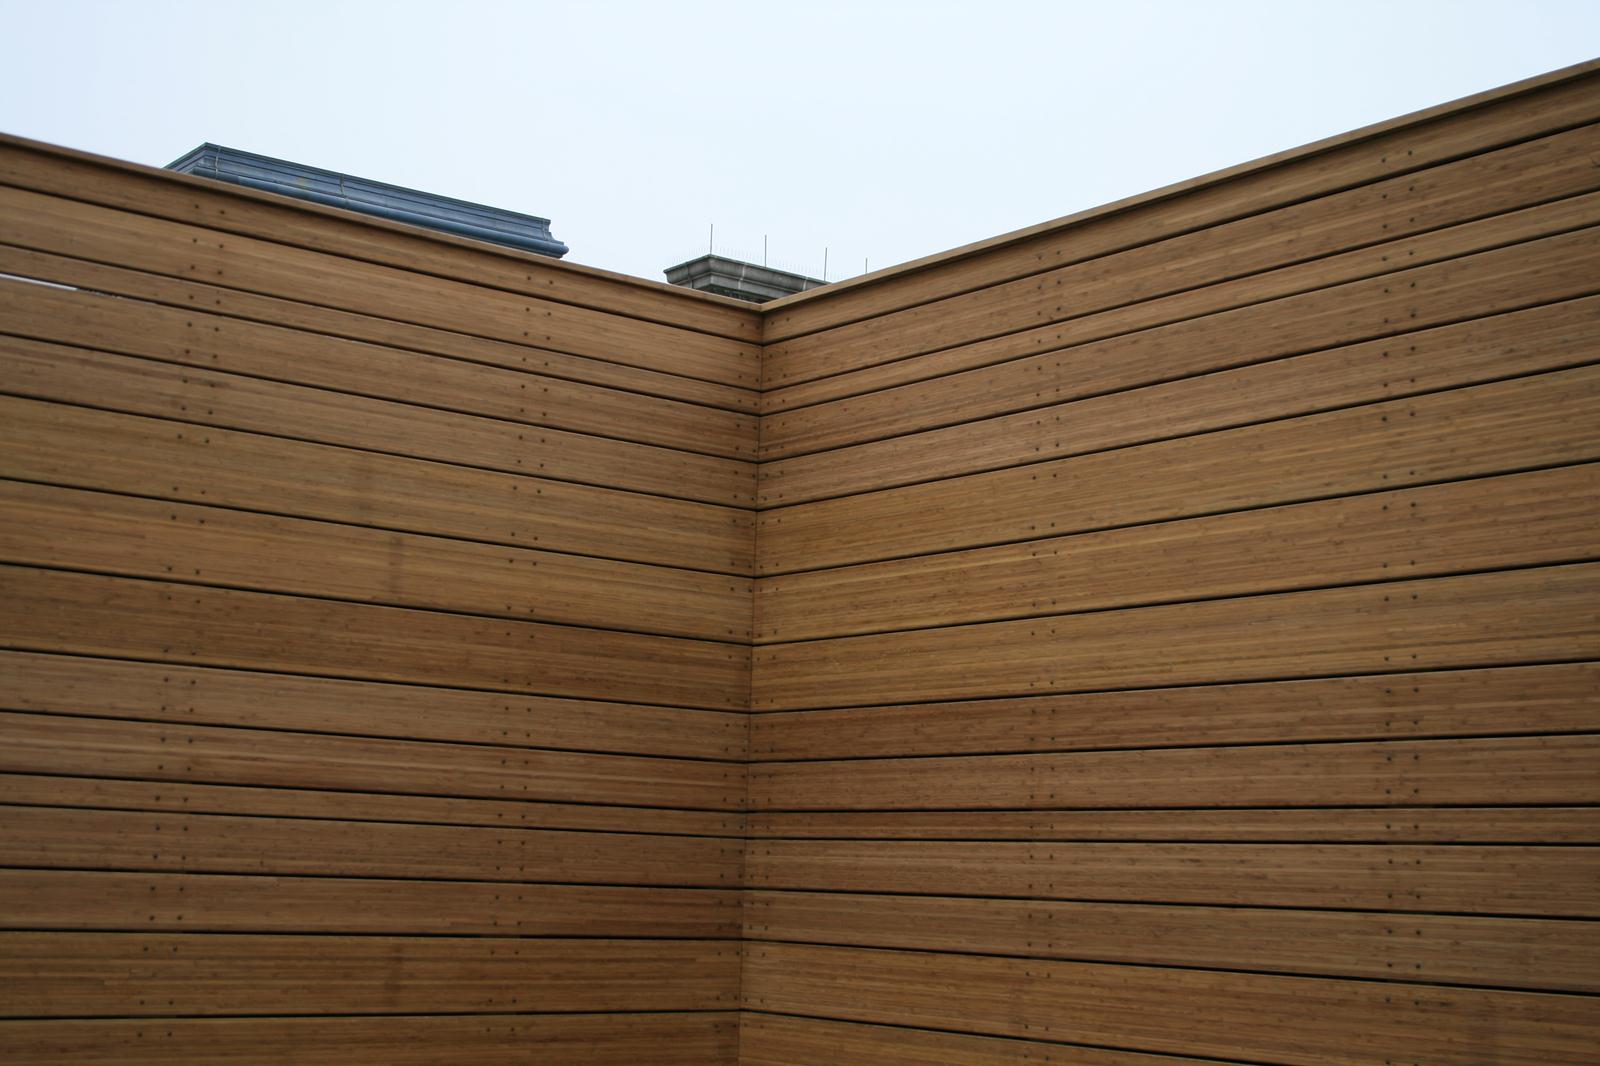 Copy of Bamdura-BAMBOO-decking-installed_oiled_fencing_tall_privacy_fence_divider_wall-11302023